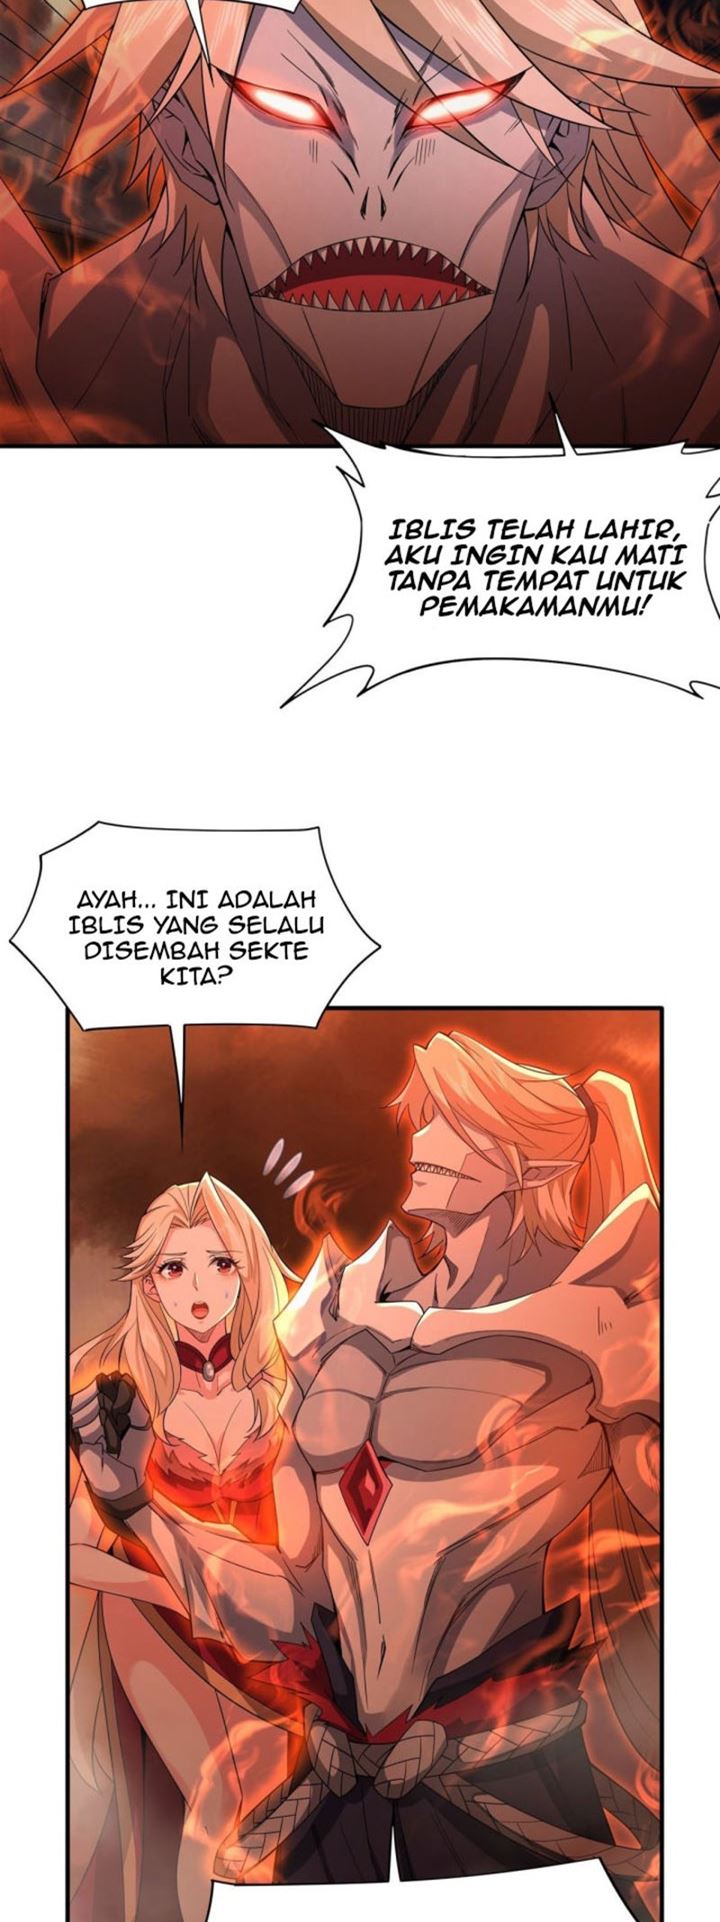 Dilarang COPAS - situs resmi www.mangacanblog.com - Komik my female apprentices are all big shots from the future 021 - chapter 21 22 Indonesia my female apprentices are all big shots from the future 021 - chapter 21 Terbaru 13|Baca Manga Komik Indonesia|Mangacan